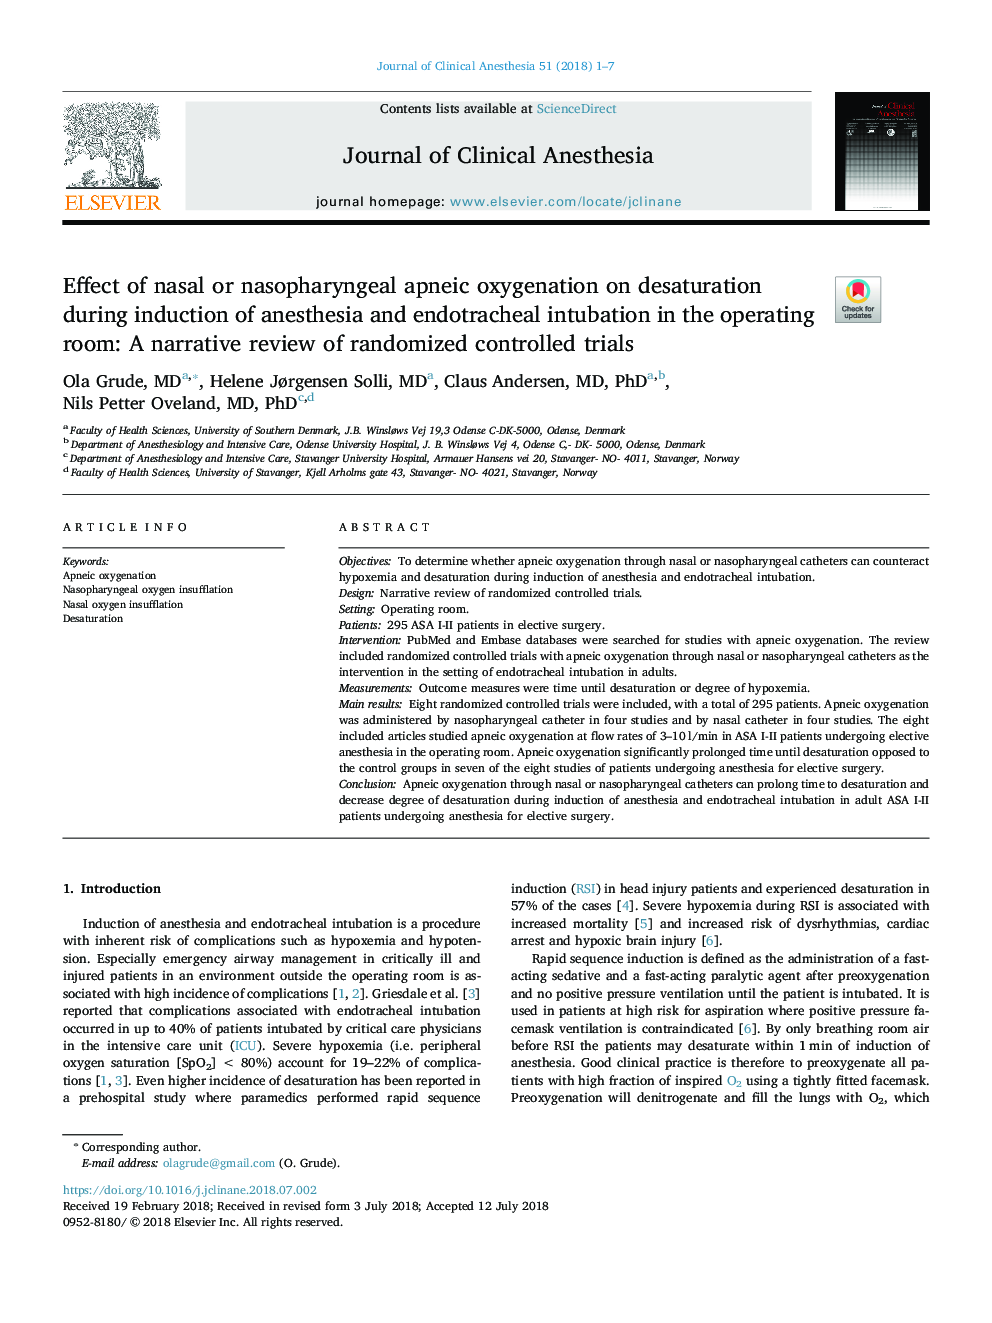 Effect of nasal or nasopharyngeal apneic oxygenation on desaturation during induction of anesthesia and endotracheal intubation in the operating room: A narrative review of randomized controlled trials